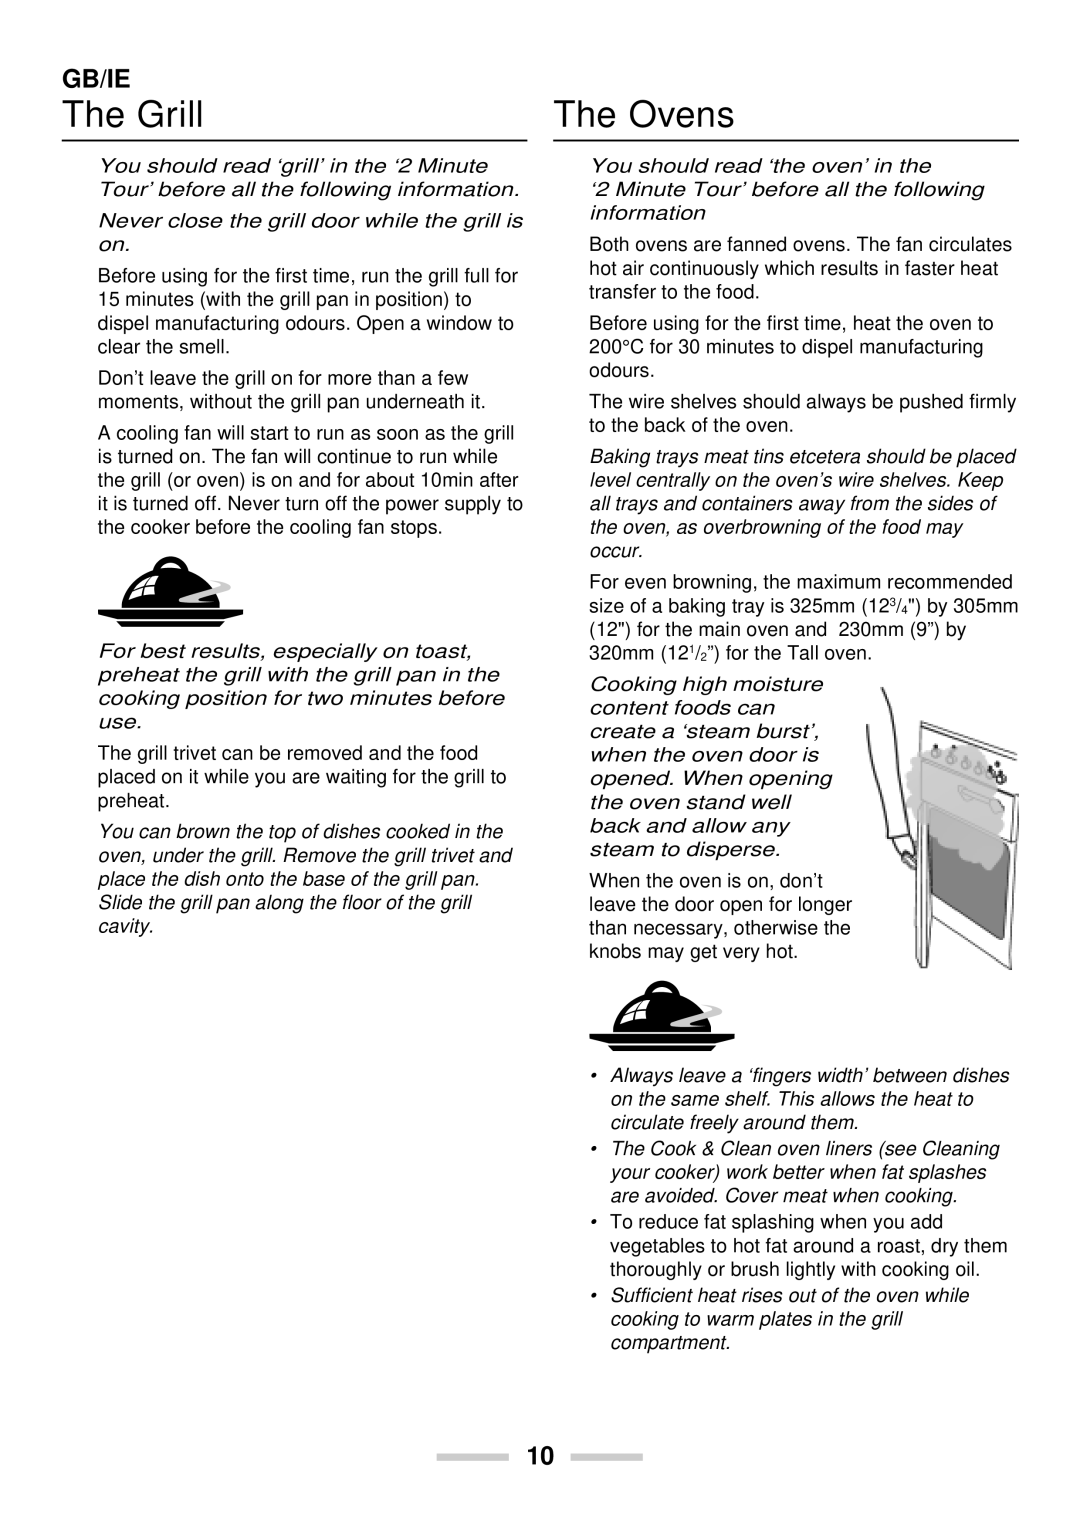 Rangemaster 90 Ceramic installation instructions The Grill, The Ovens, Gb/Ie 